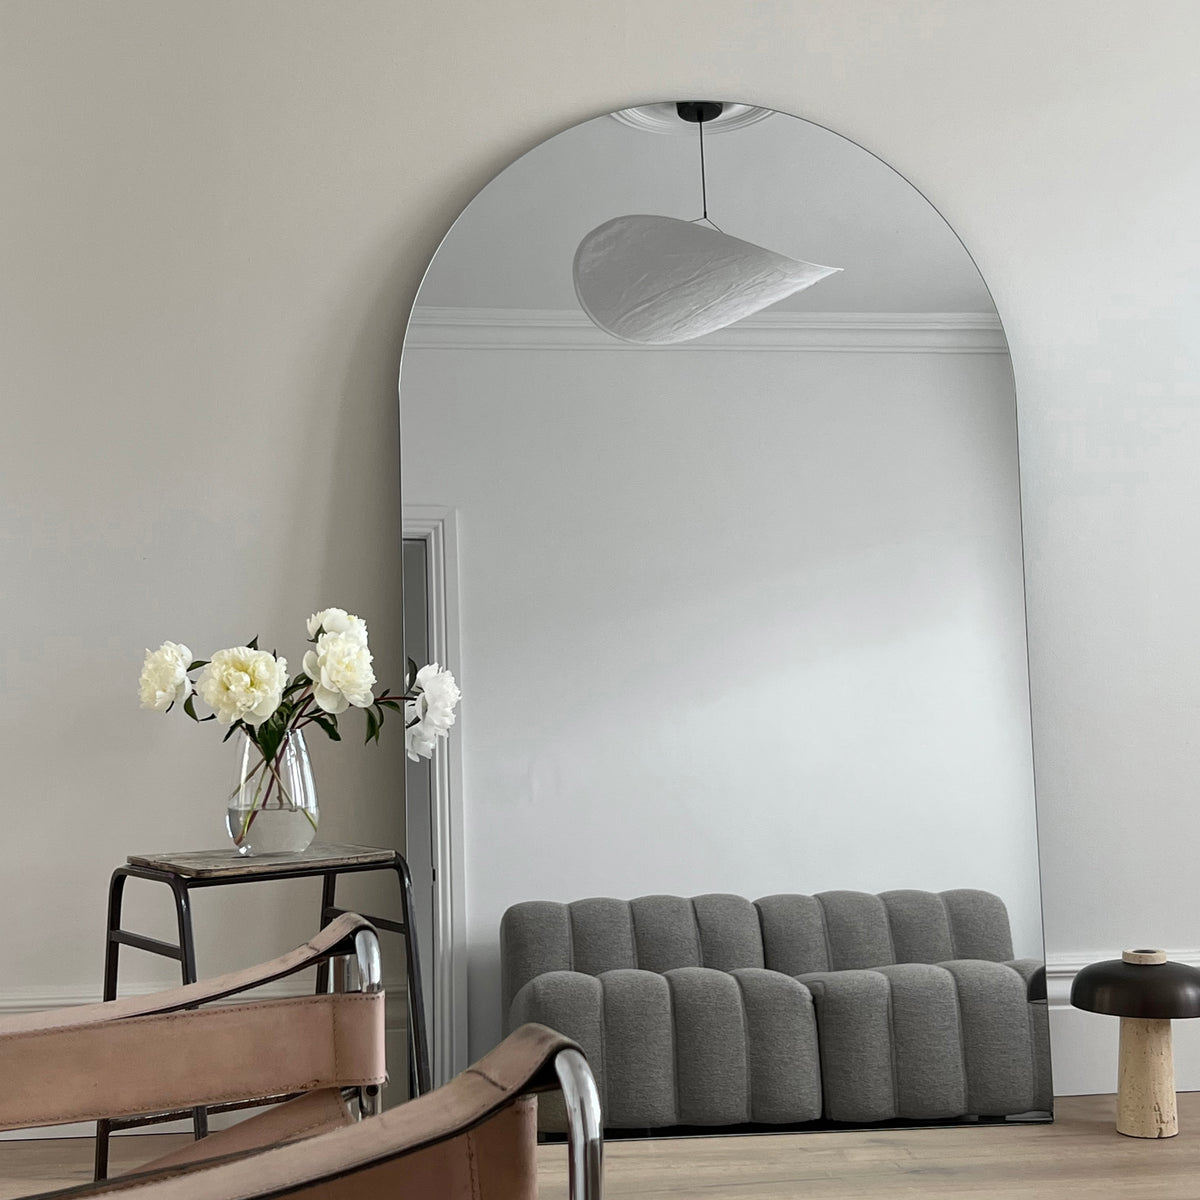 Extra large frameless arched full length mirror in lounge